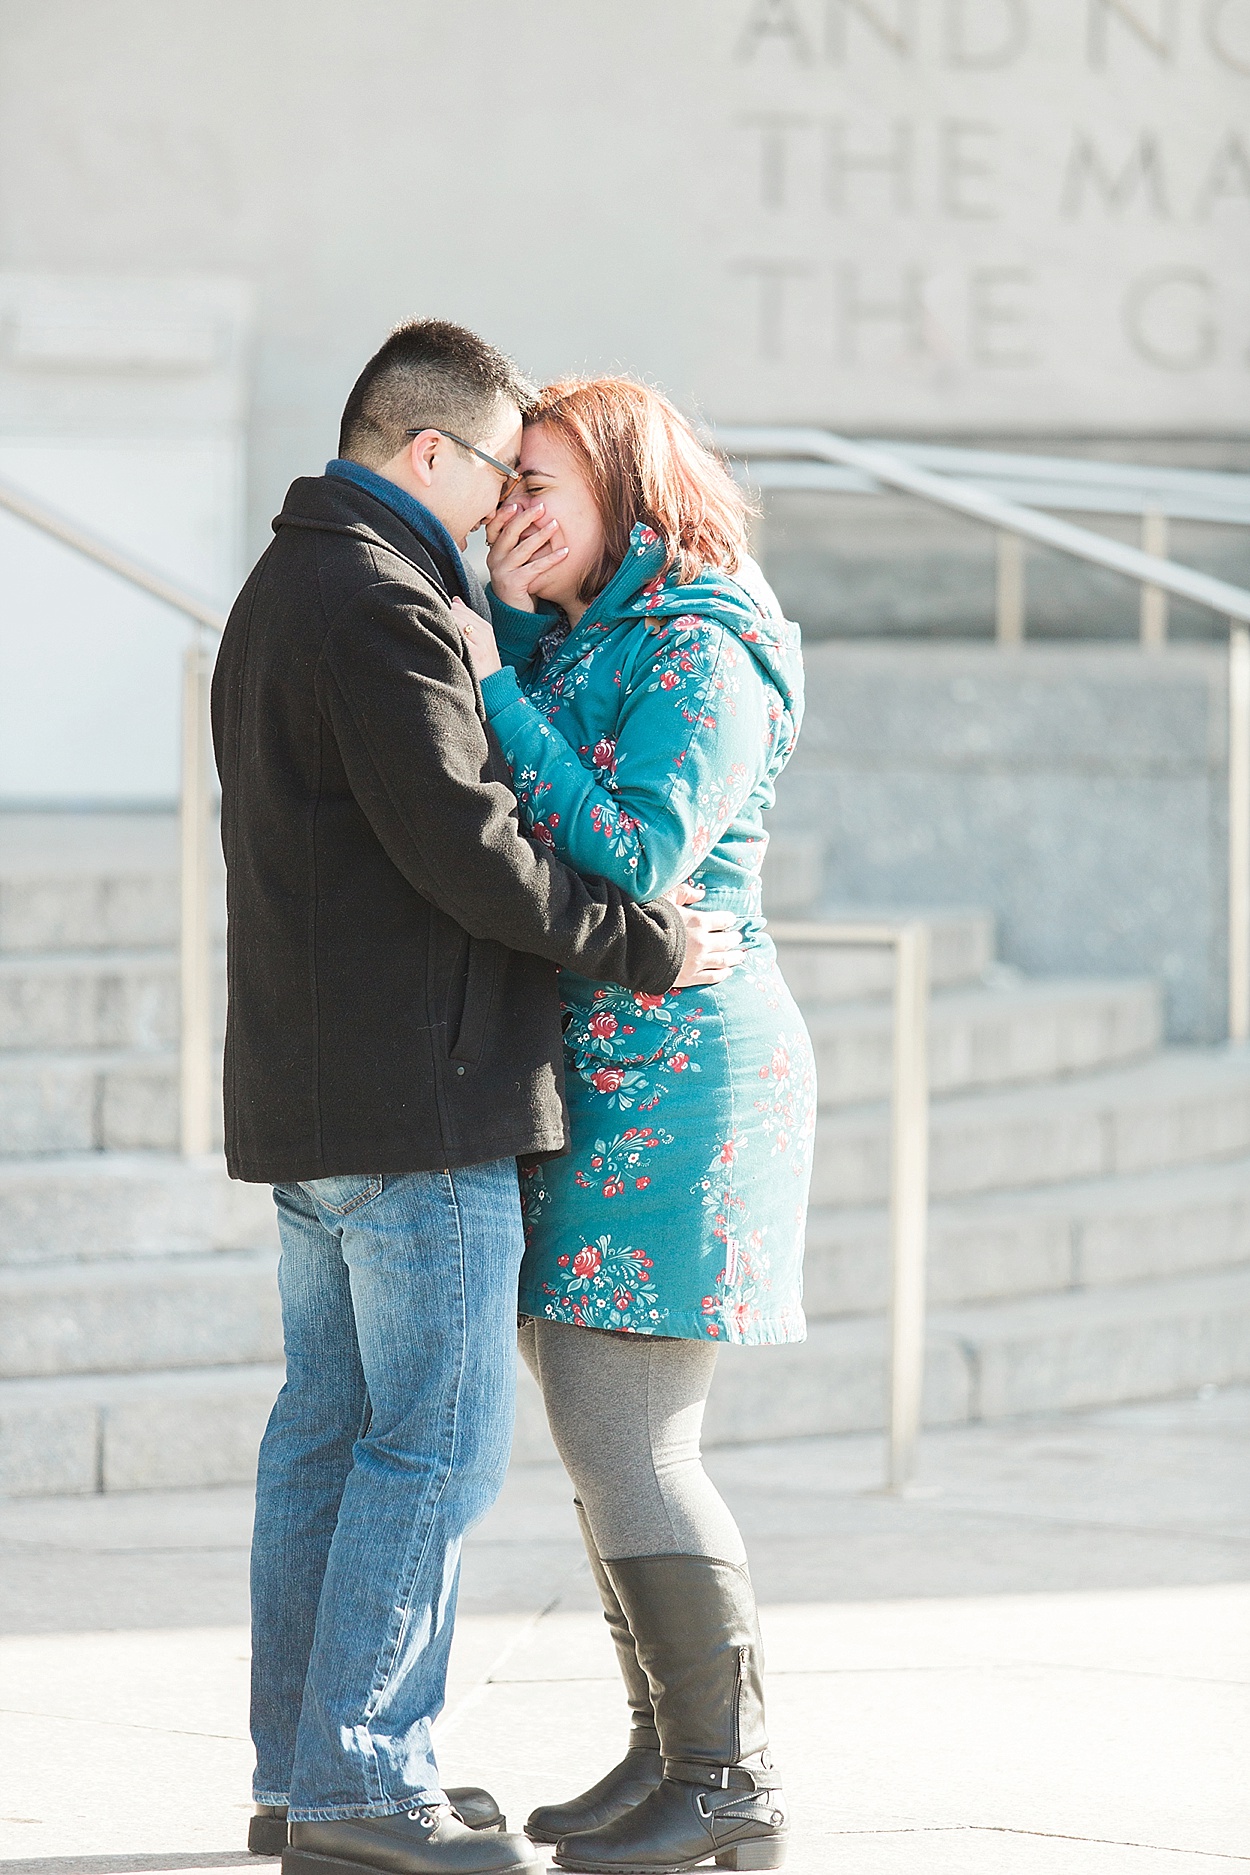 New York City, Brooklyn Public Library proposal | Abby Grace Photography